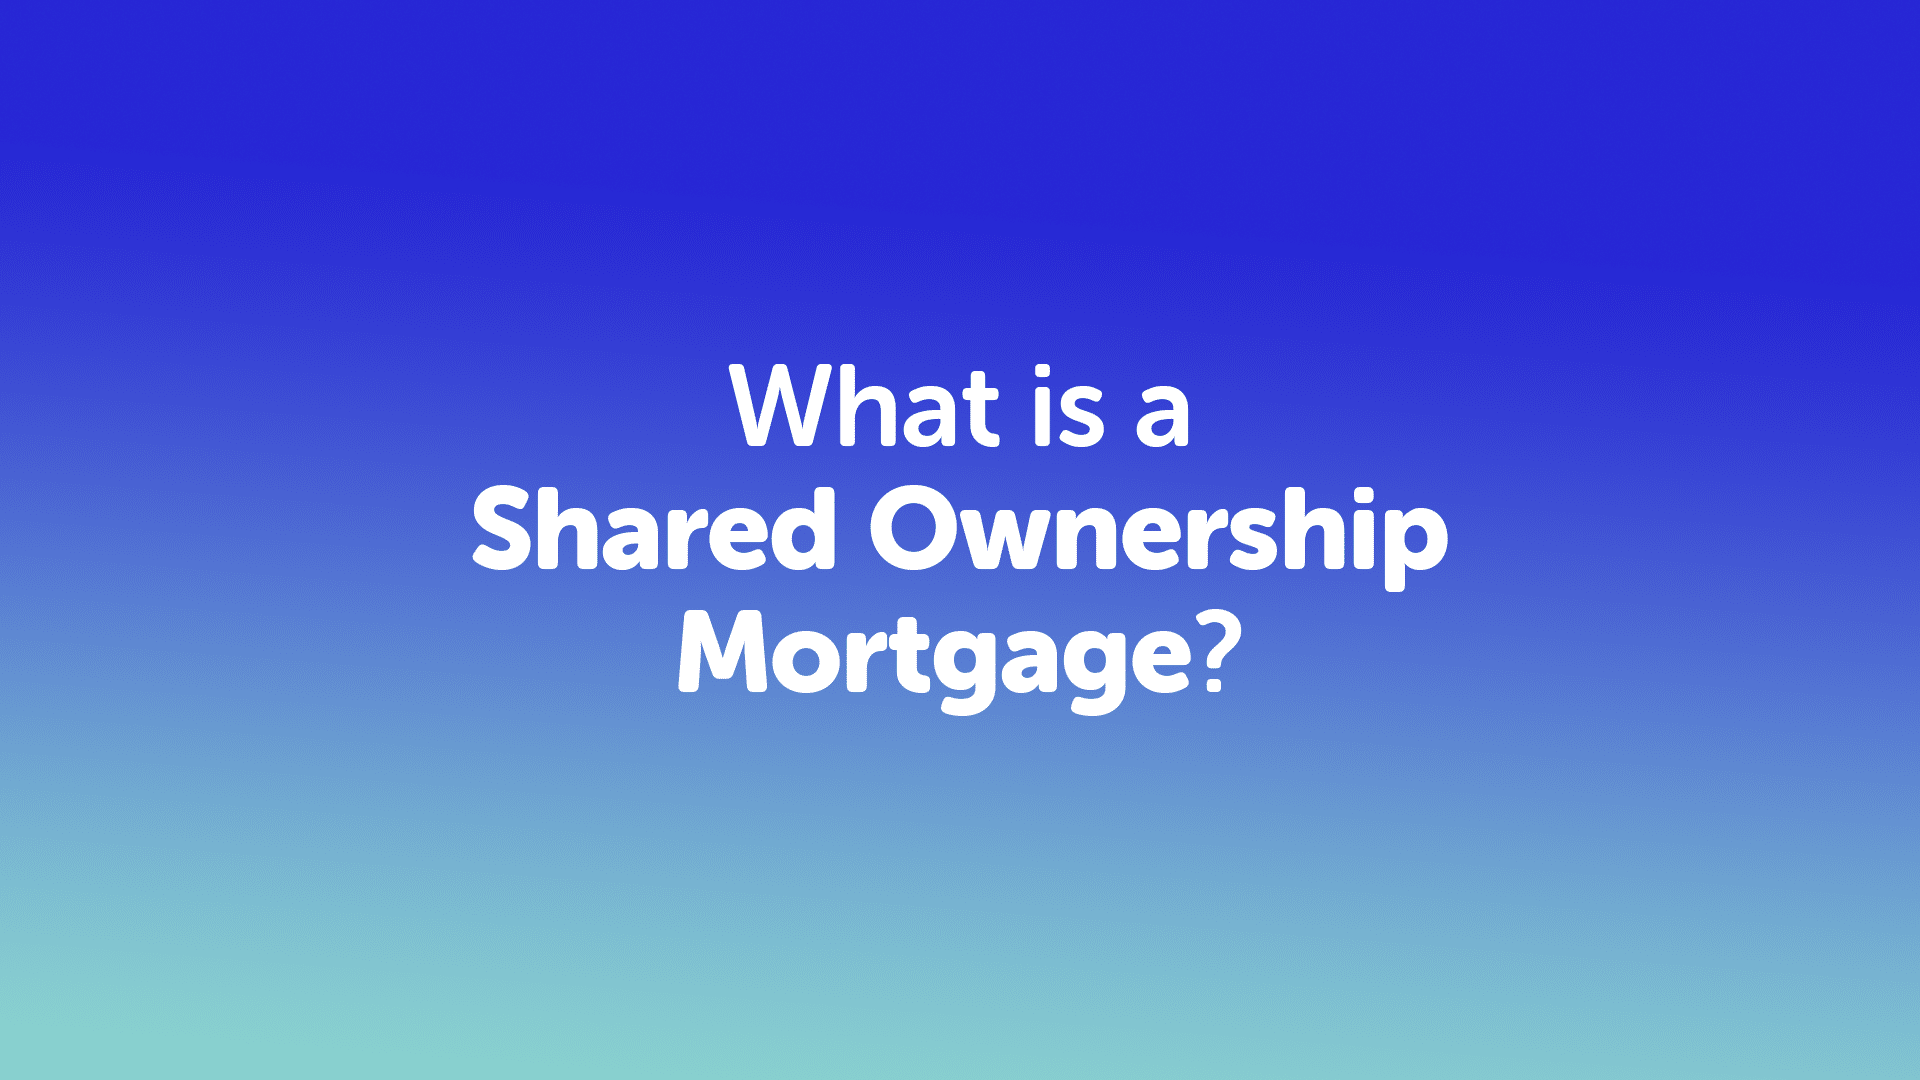 What is a Shared Ownership Mortgage in Halifax?